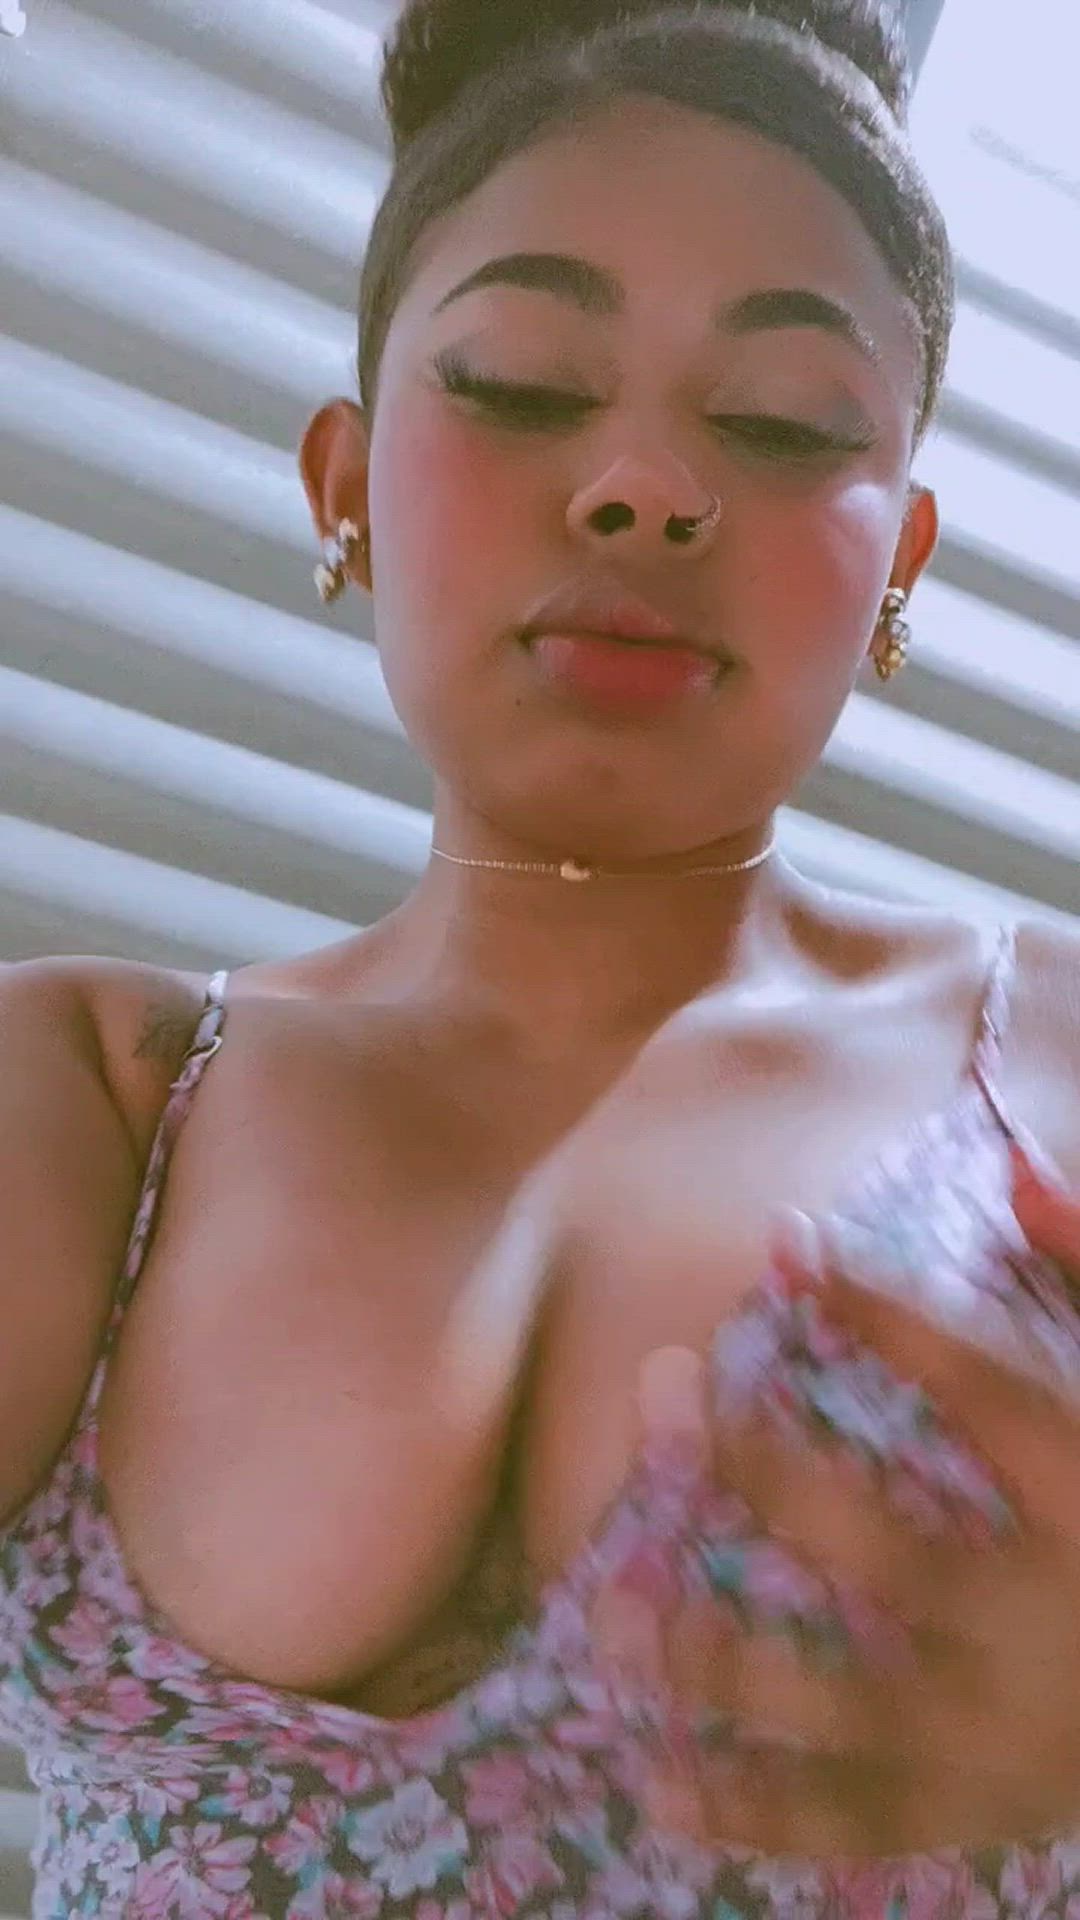 Tits porn video with onlyfans model chanelscott <strong>@chanelscott</strong>